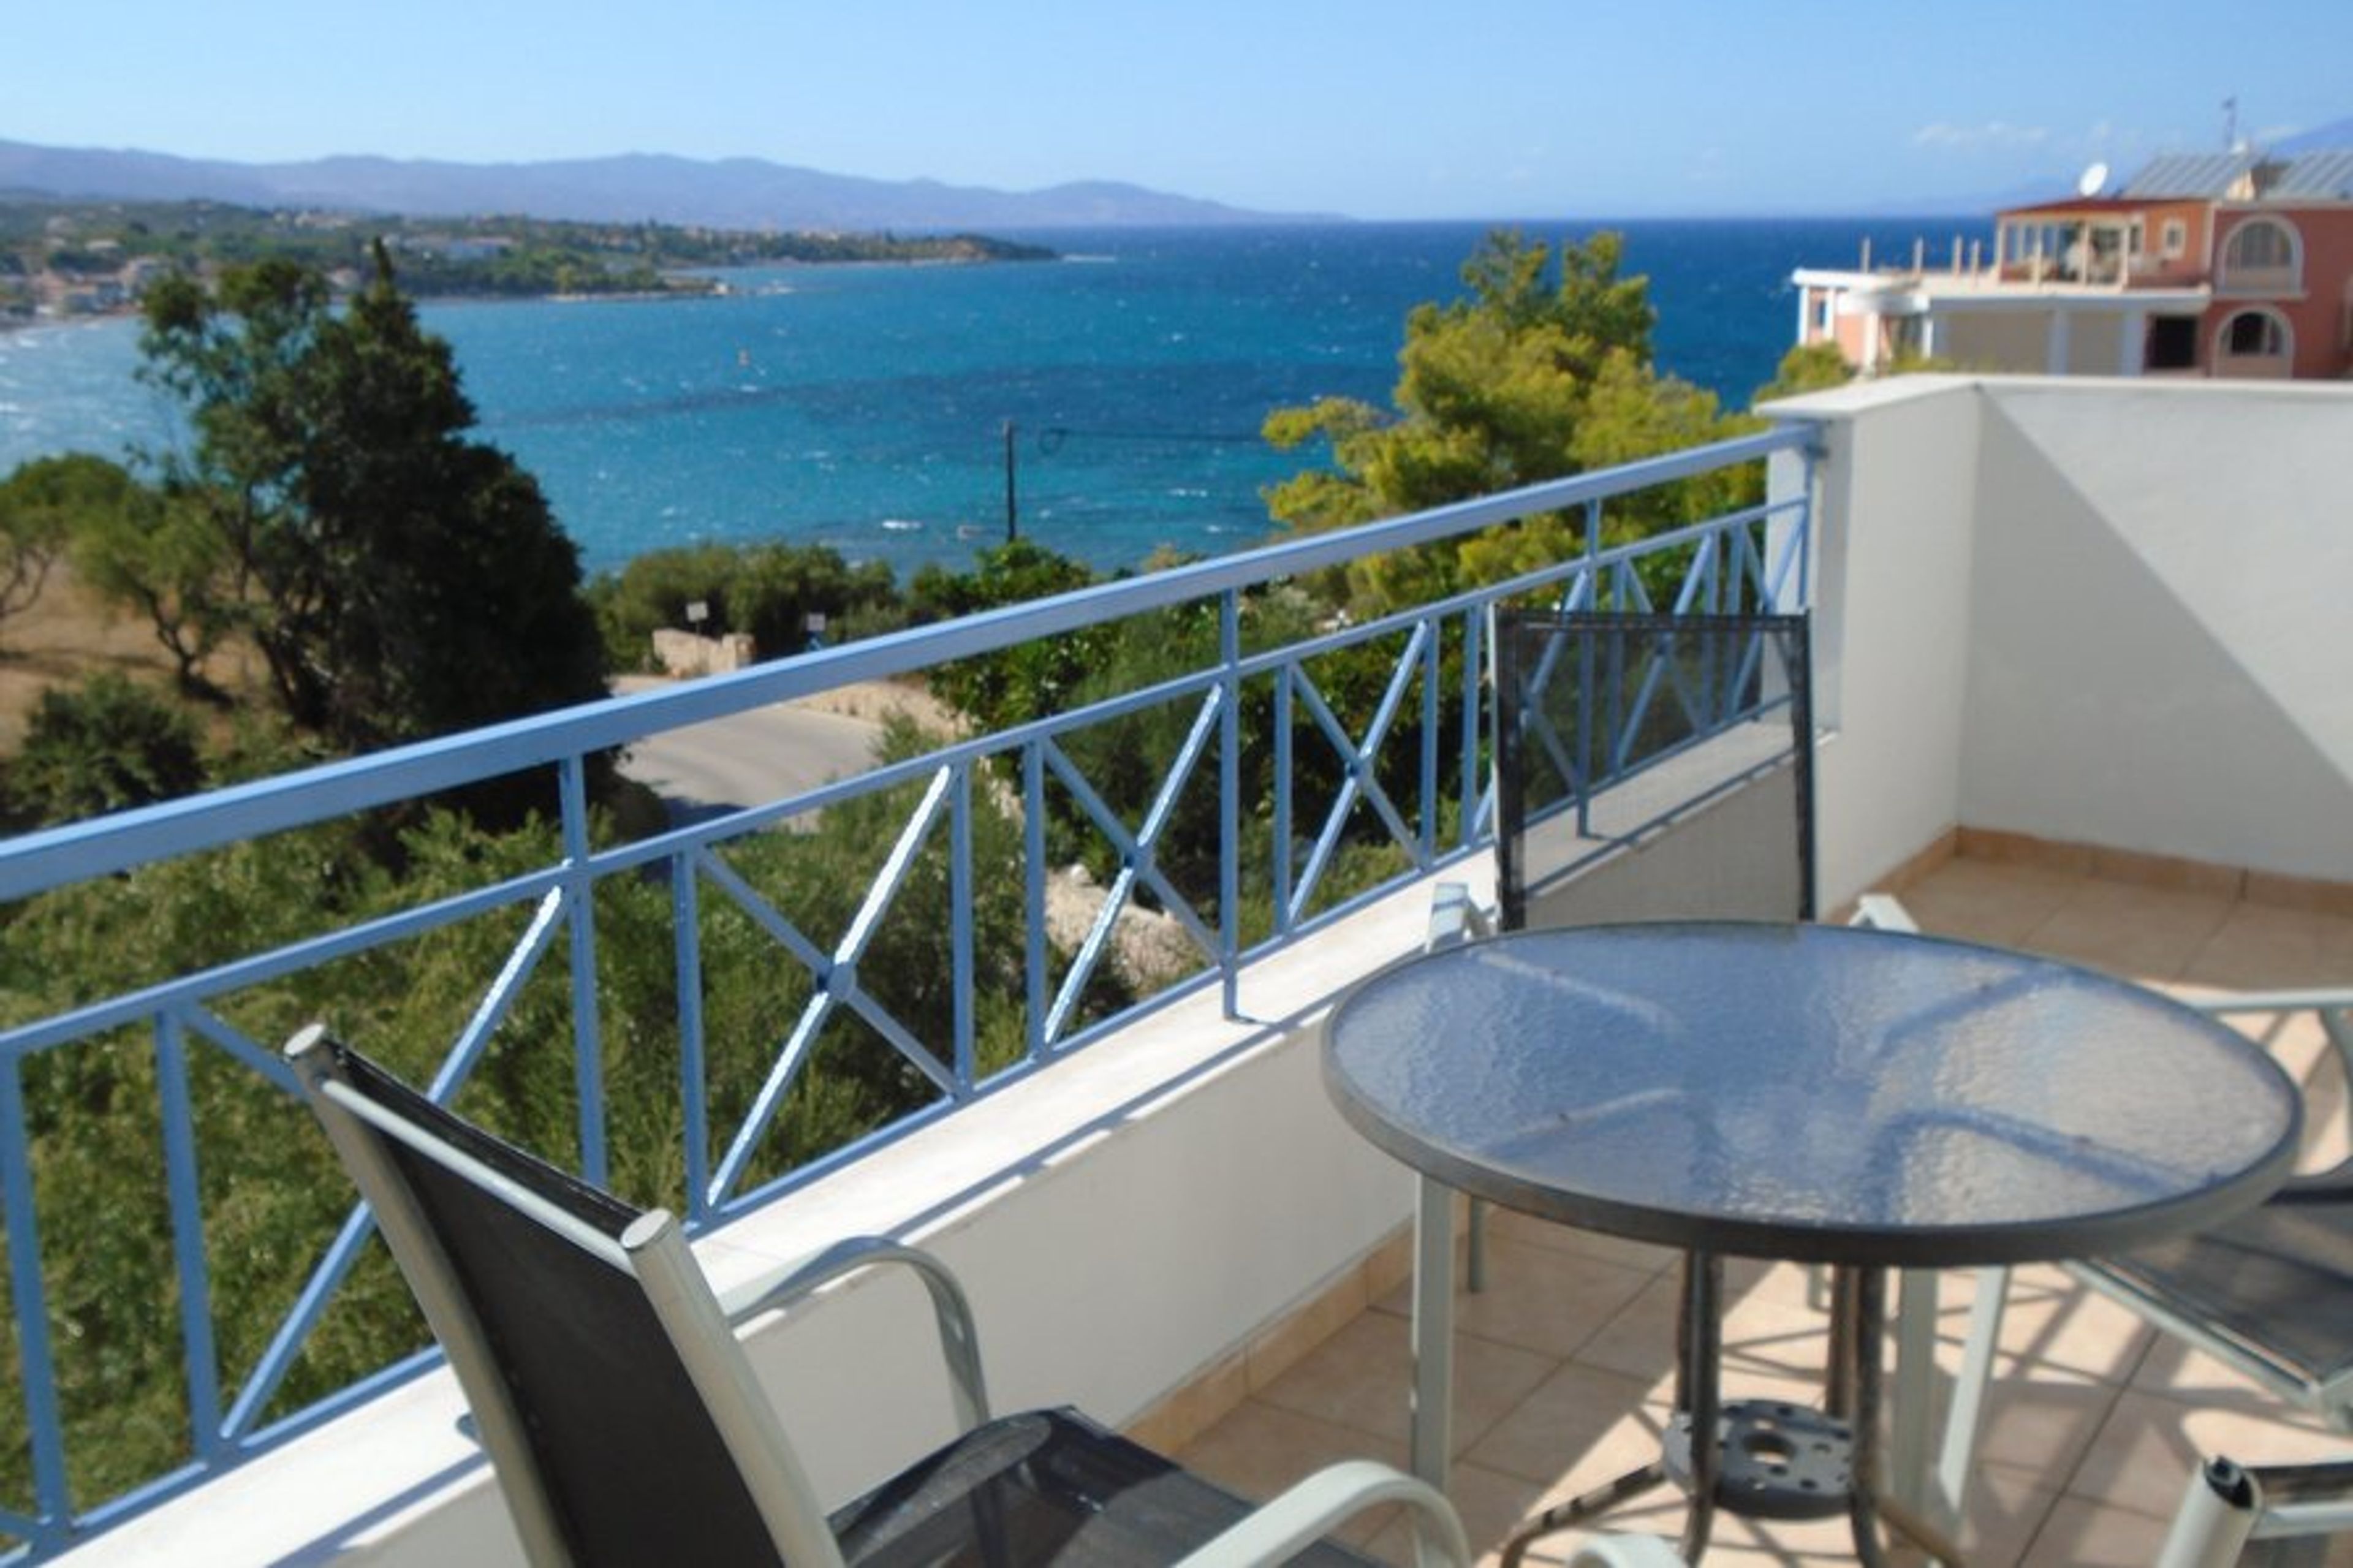 Sea View stunning views & sunsets overlooking the Bay of Tsilivi.